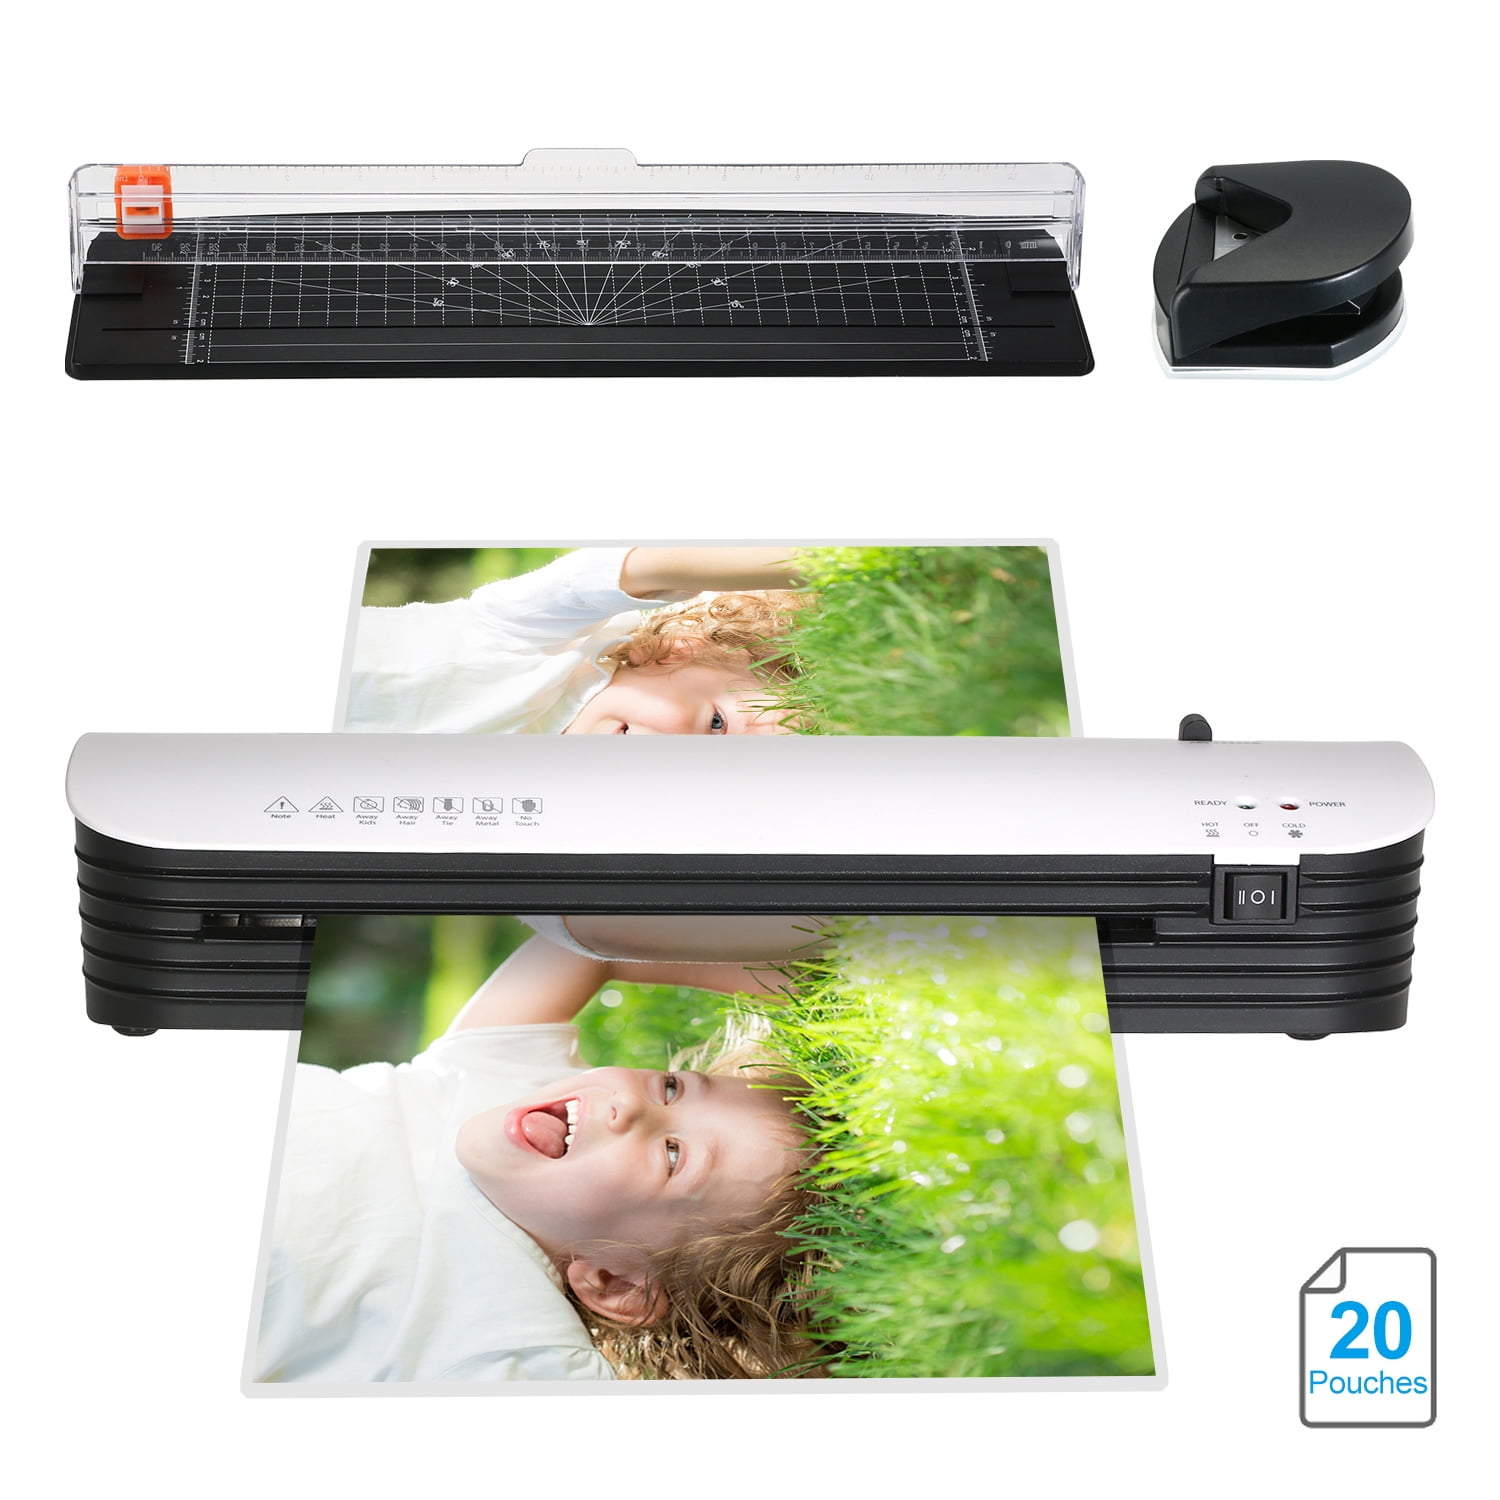 SL299 Laminator Machine Set A4 Size Hot and Cold Lamination 2 System with Laminating Pouches Paper Cutter Corner Rounder ABS Button for Home Office School Supplies - Walmart.com